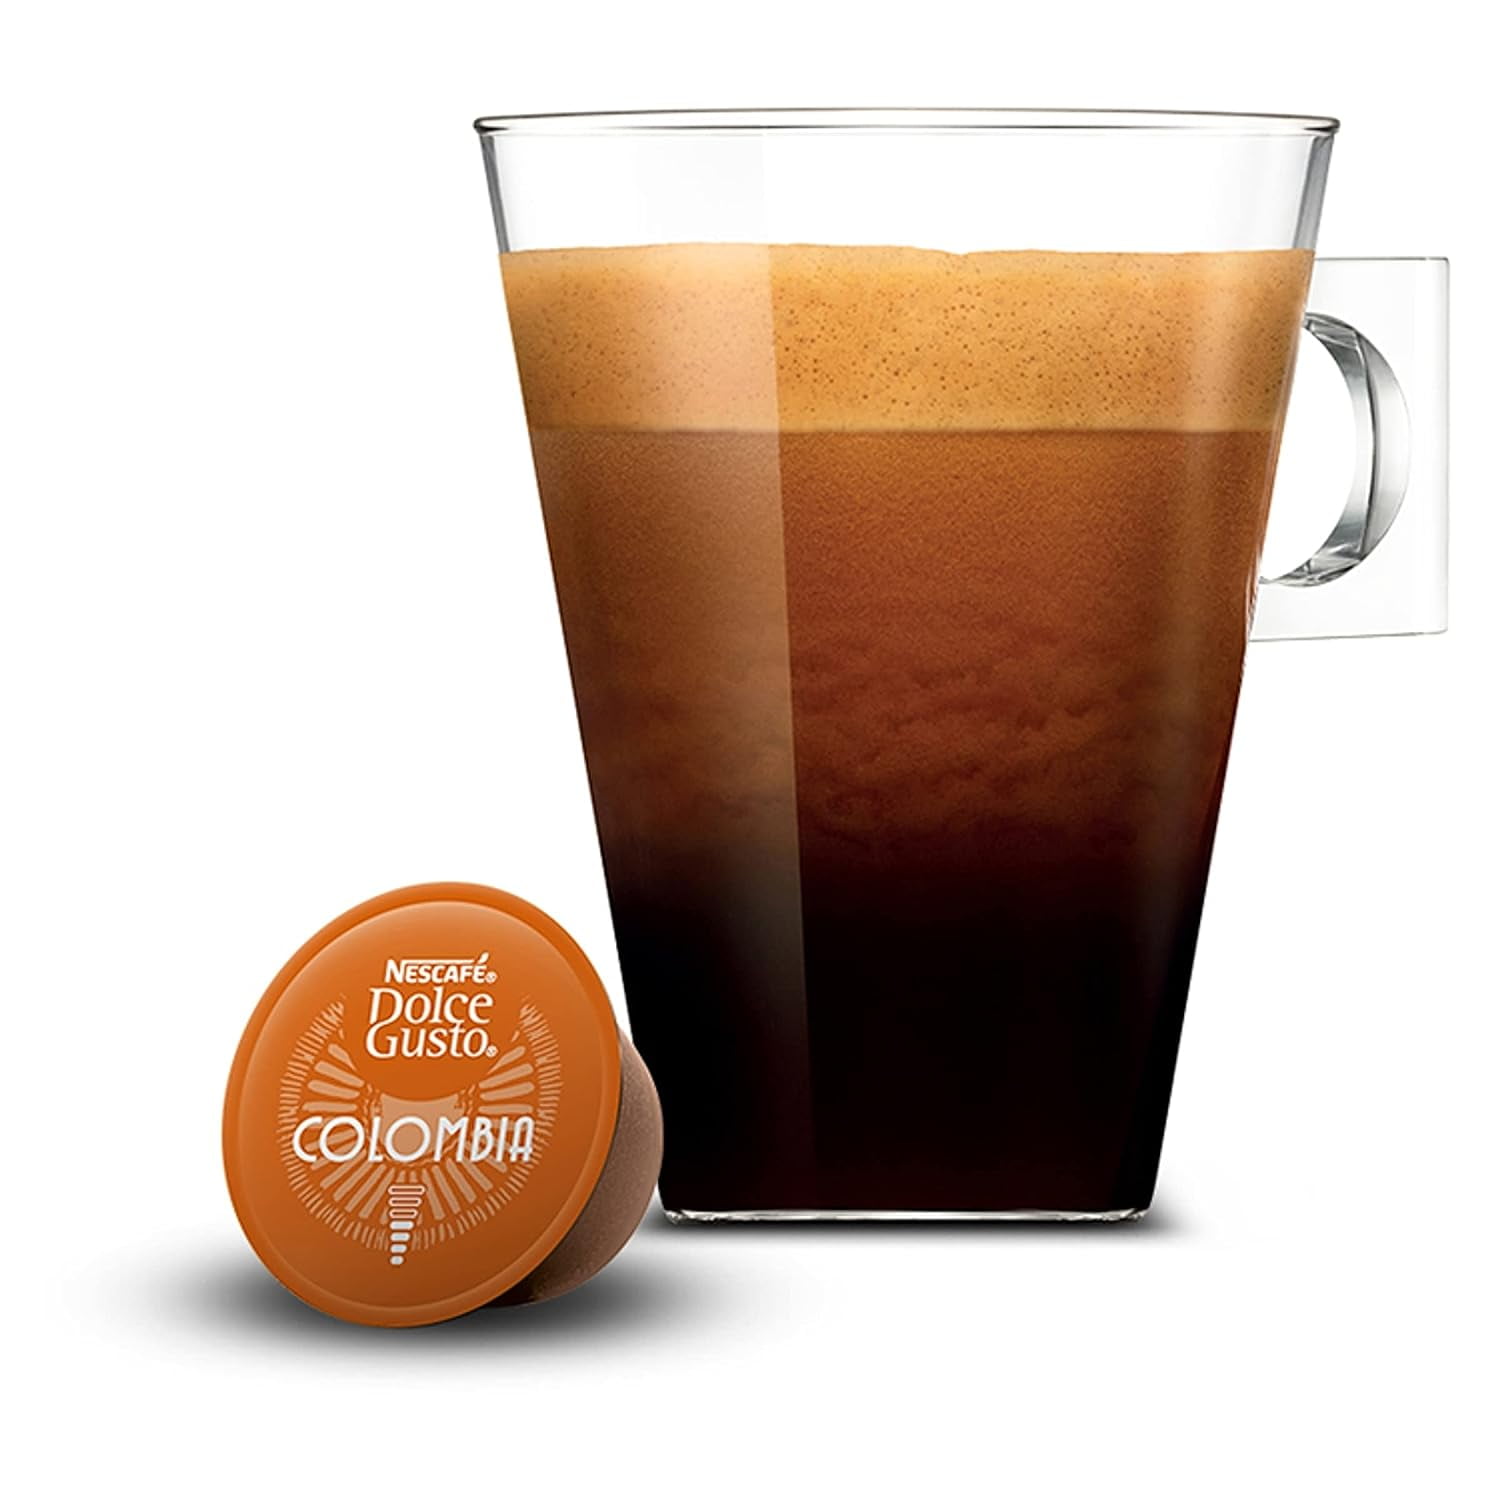 NESCAFE DOLCE GUSTO Lungo Colombia capsules, 12 pcs - Delivery Worldwide